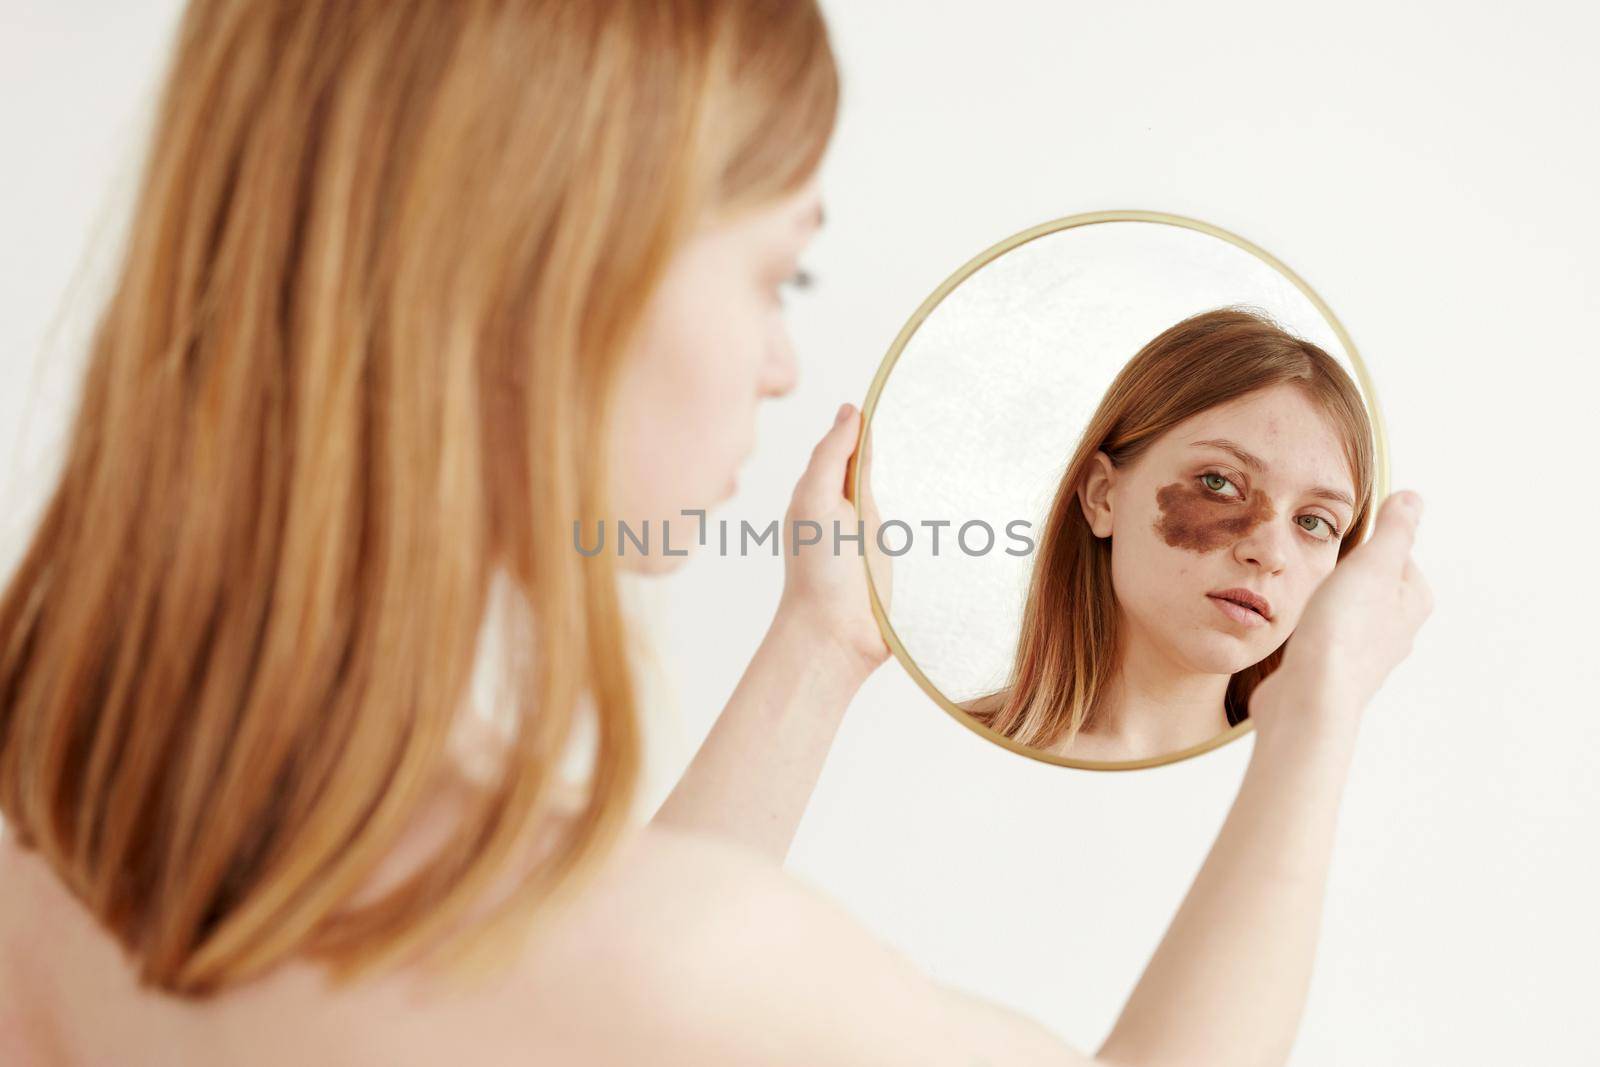 Woman with birthmark on face looking at mirror by Demkat